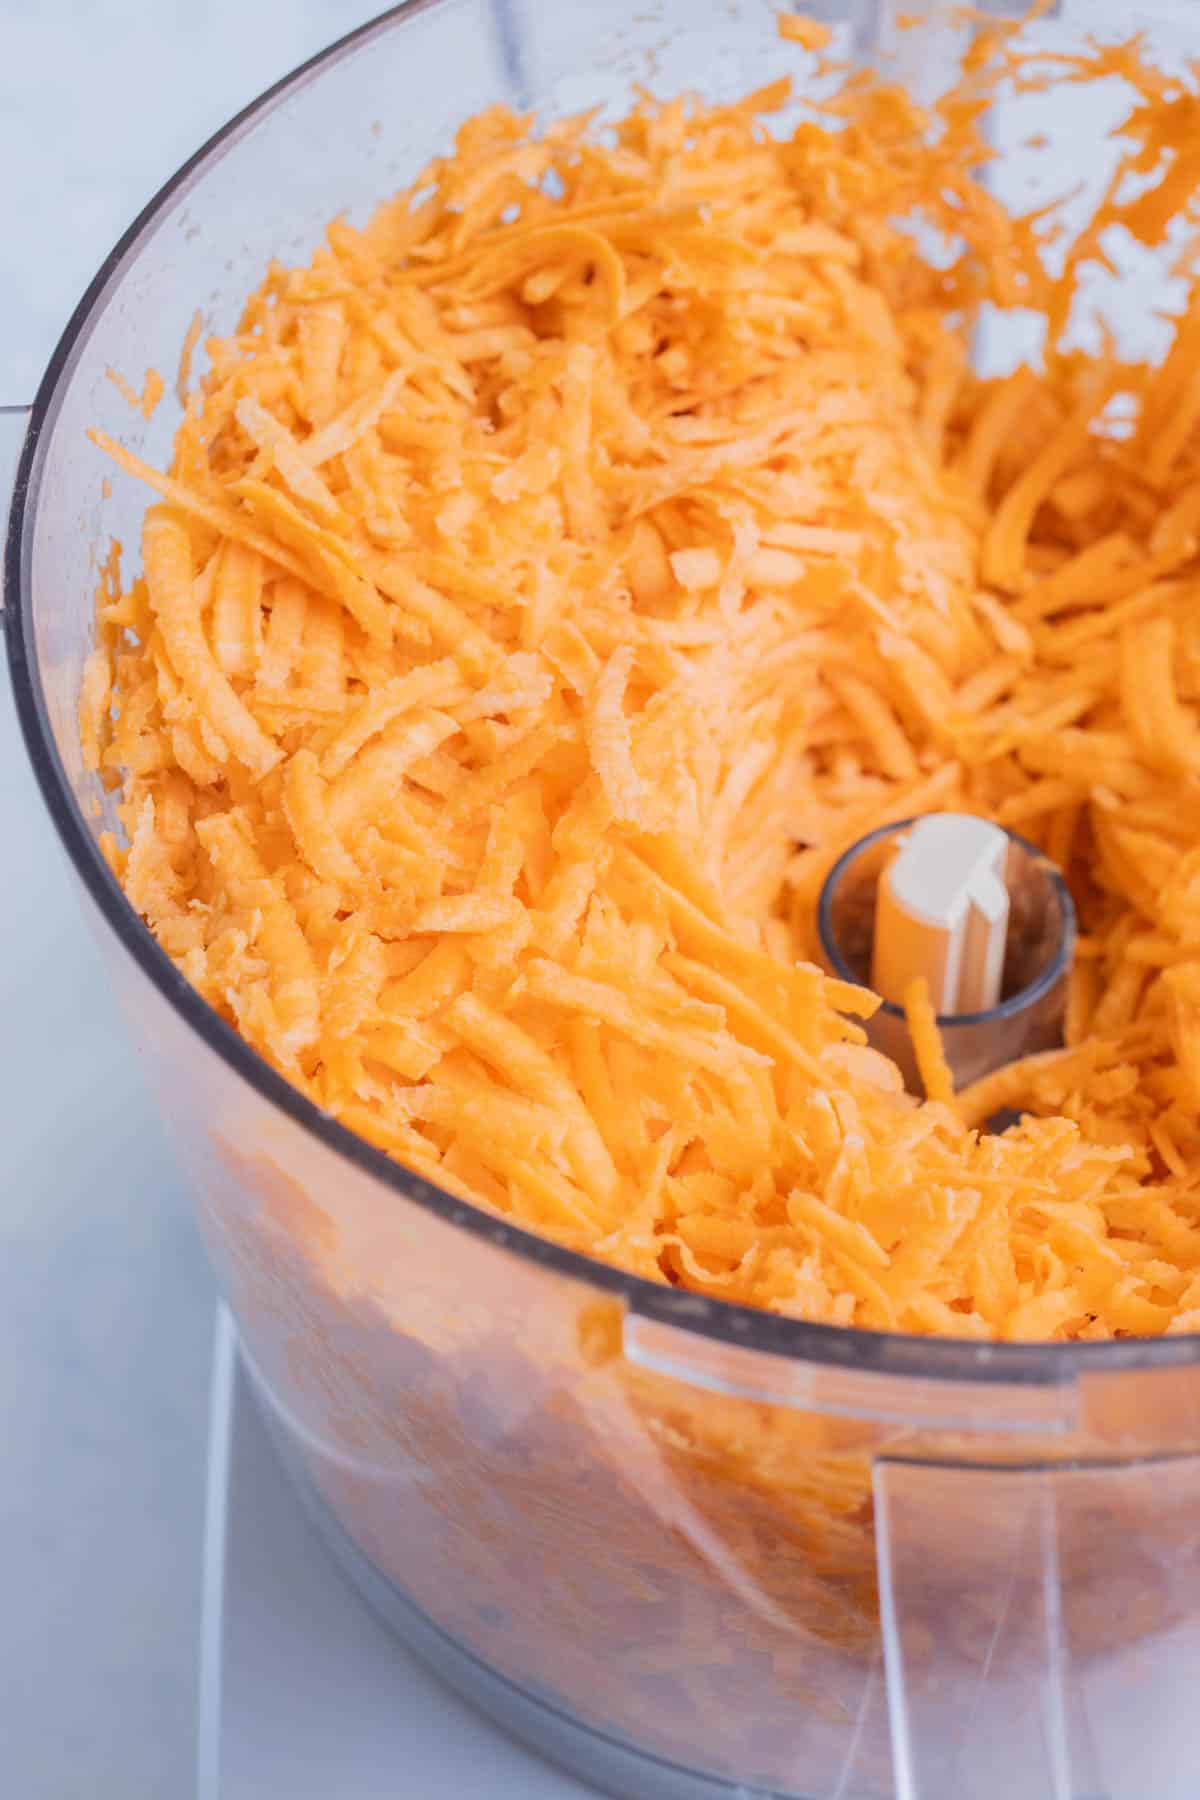 Sweet potatoes are grated in a food processor.